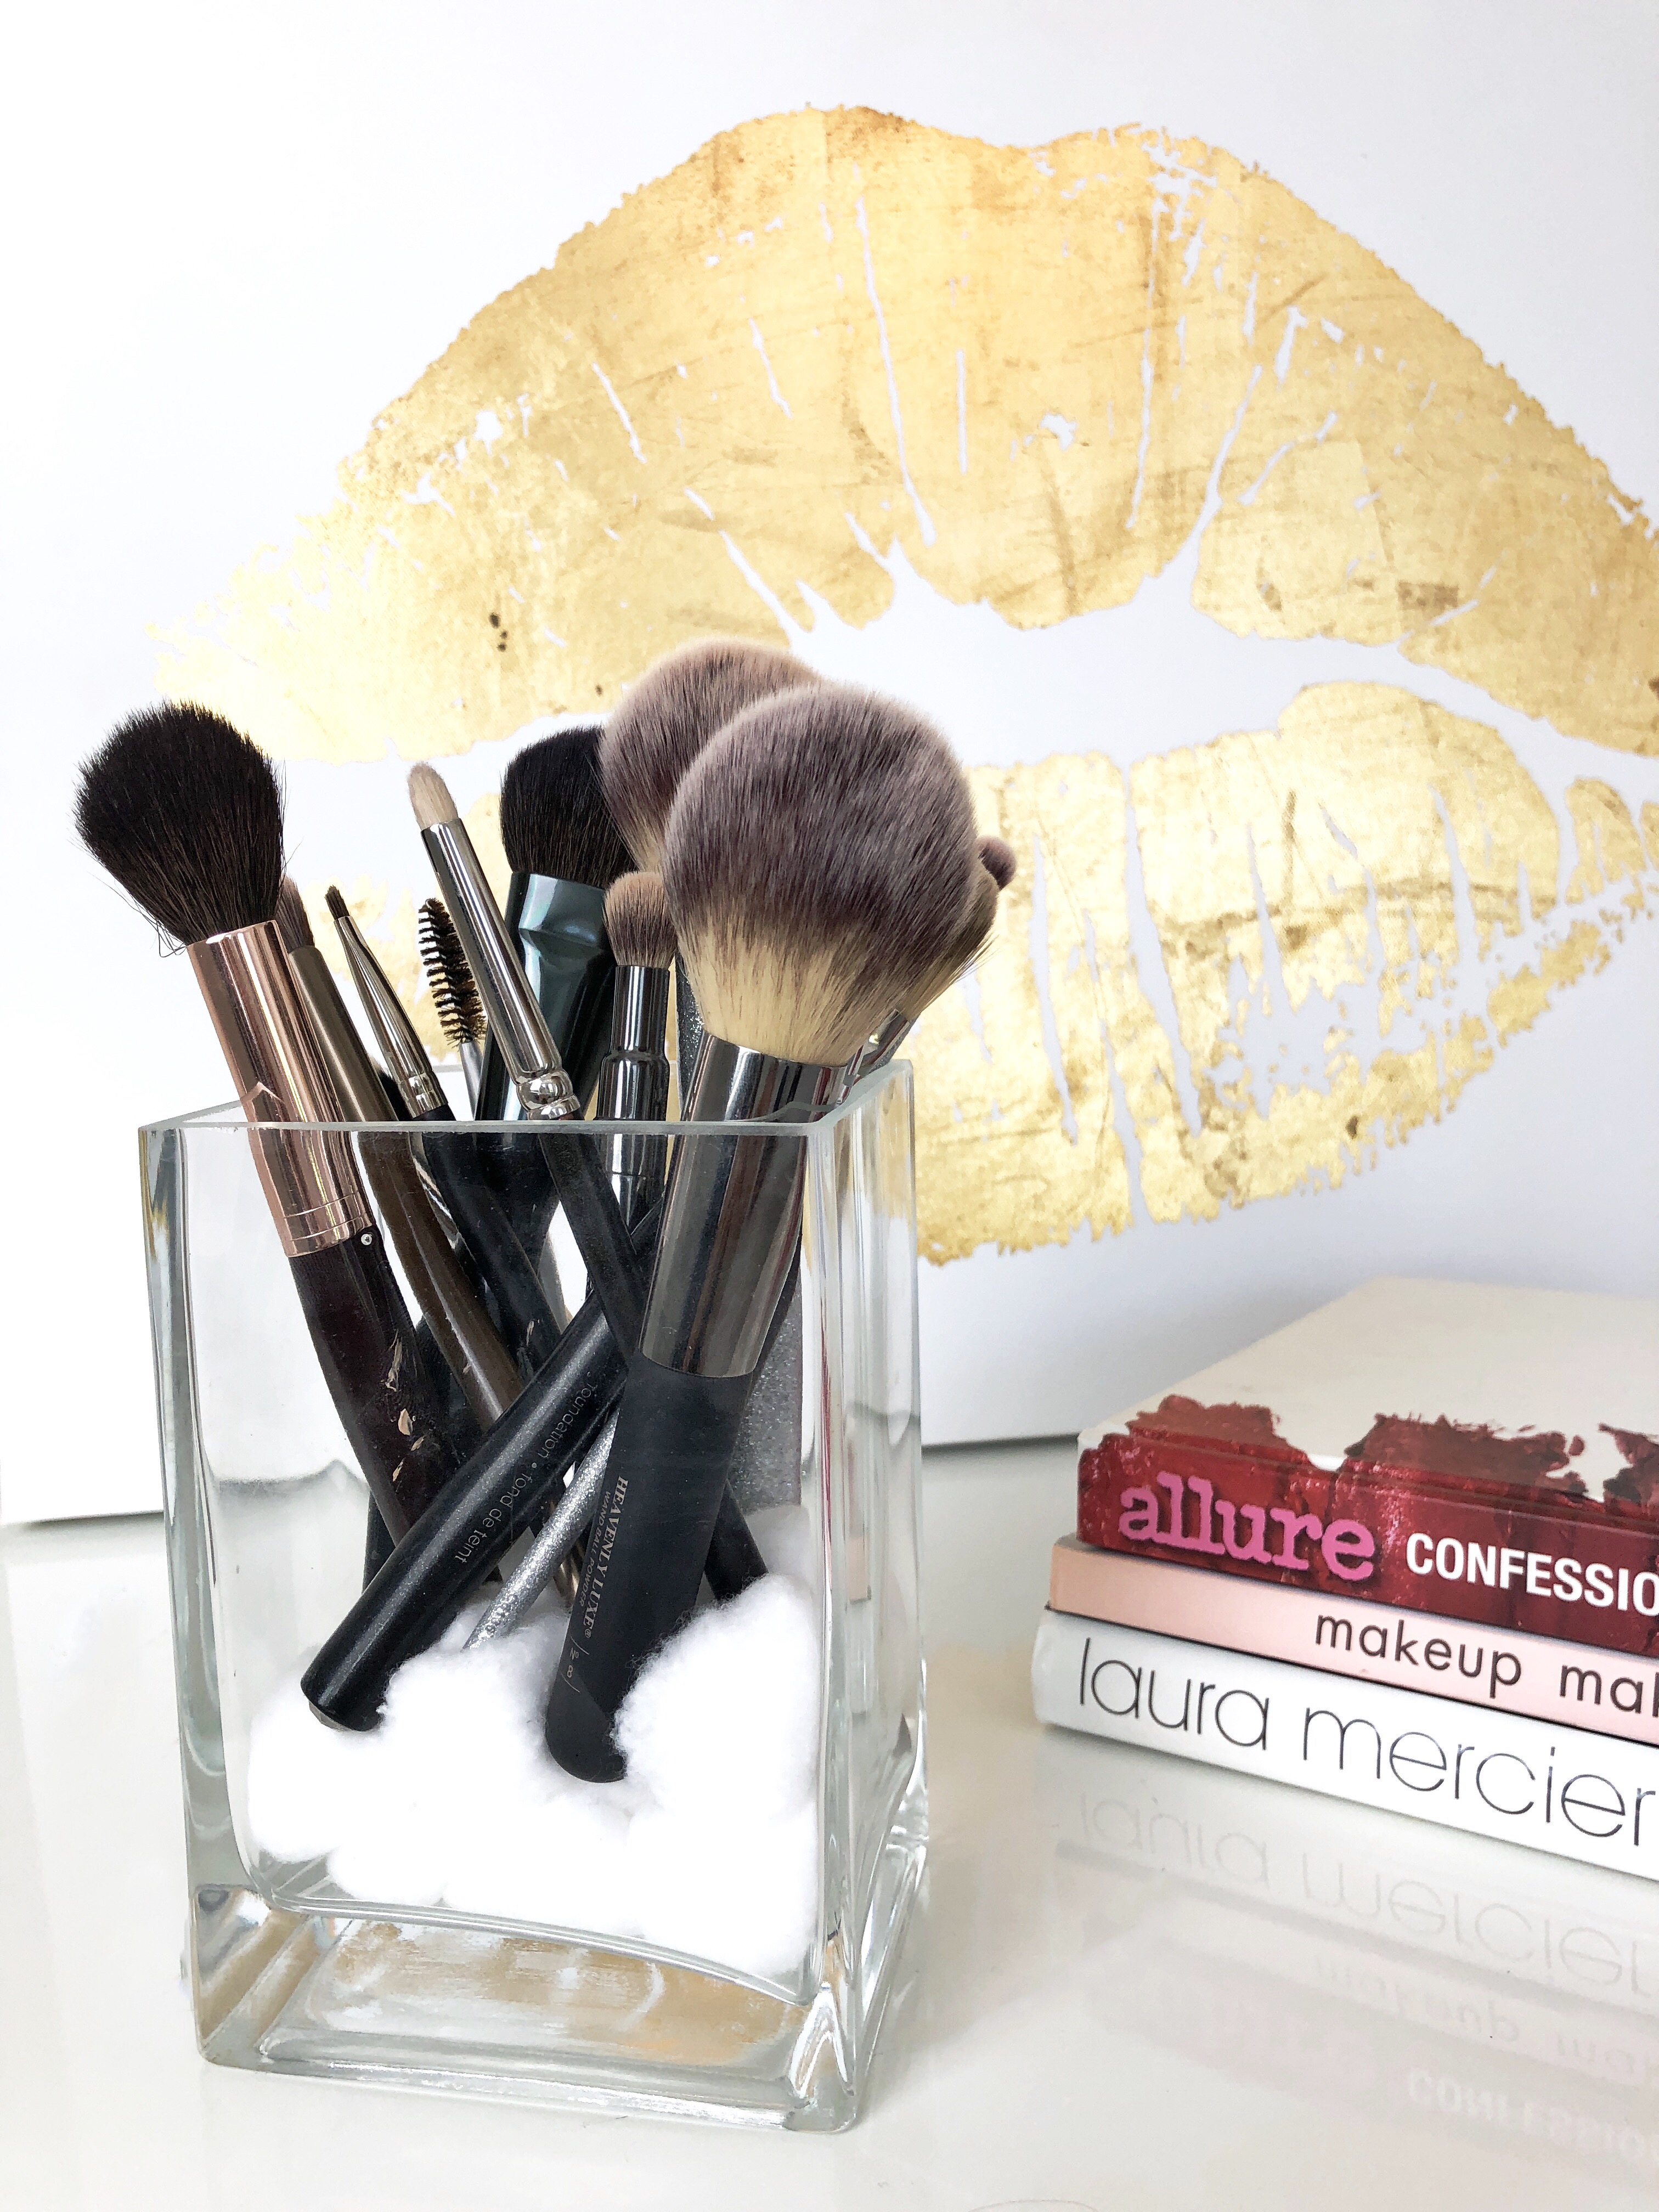 The 9 Makeup Brushes You Actually Need + How To Use Them